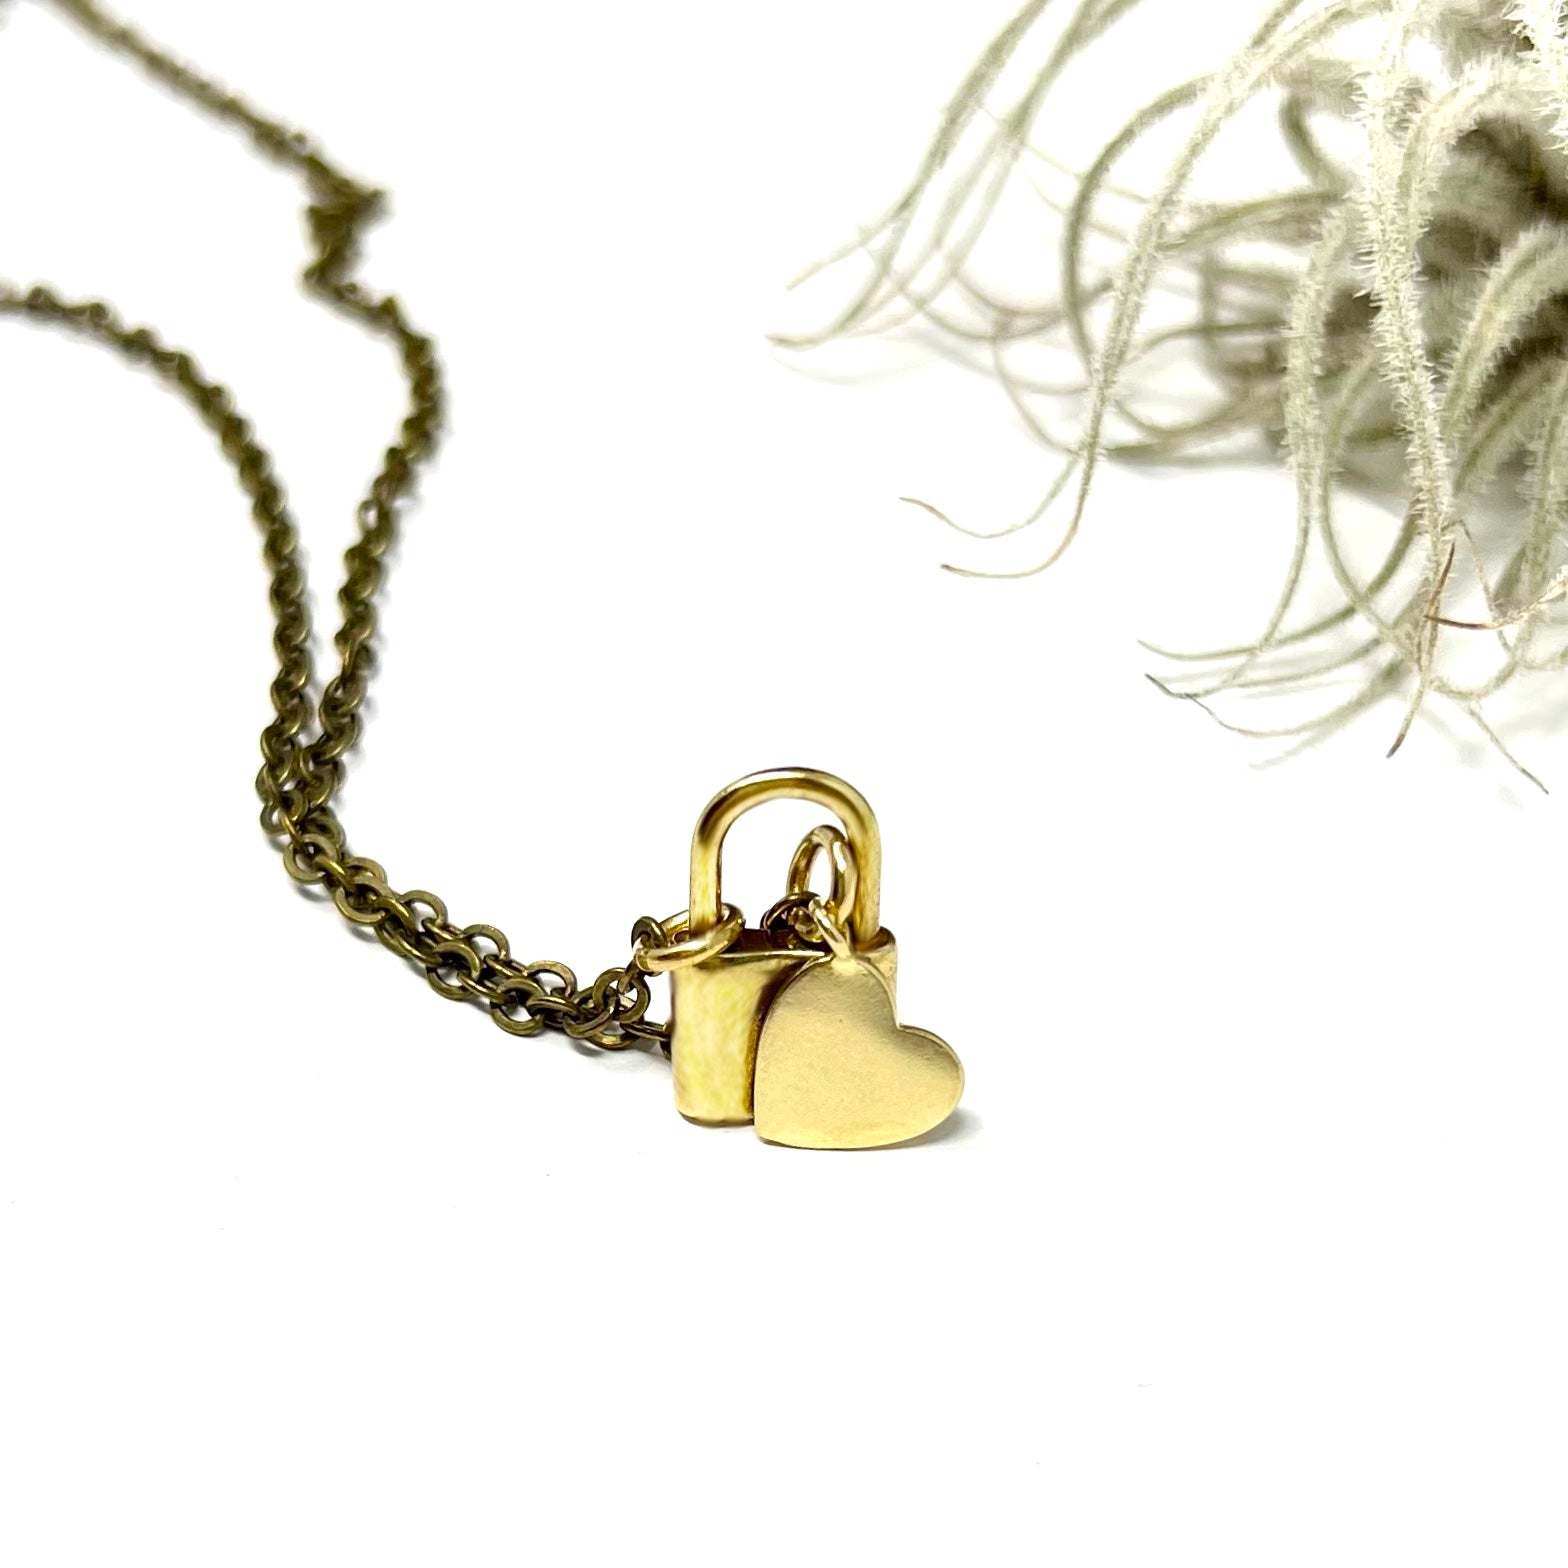 Lock Charm Chain Necklace